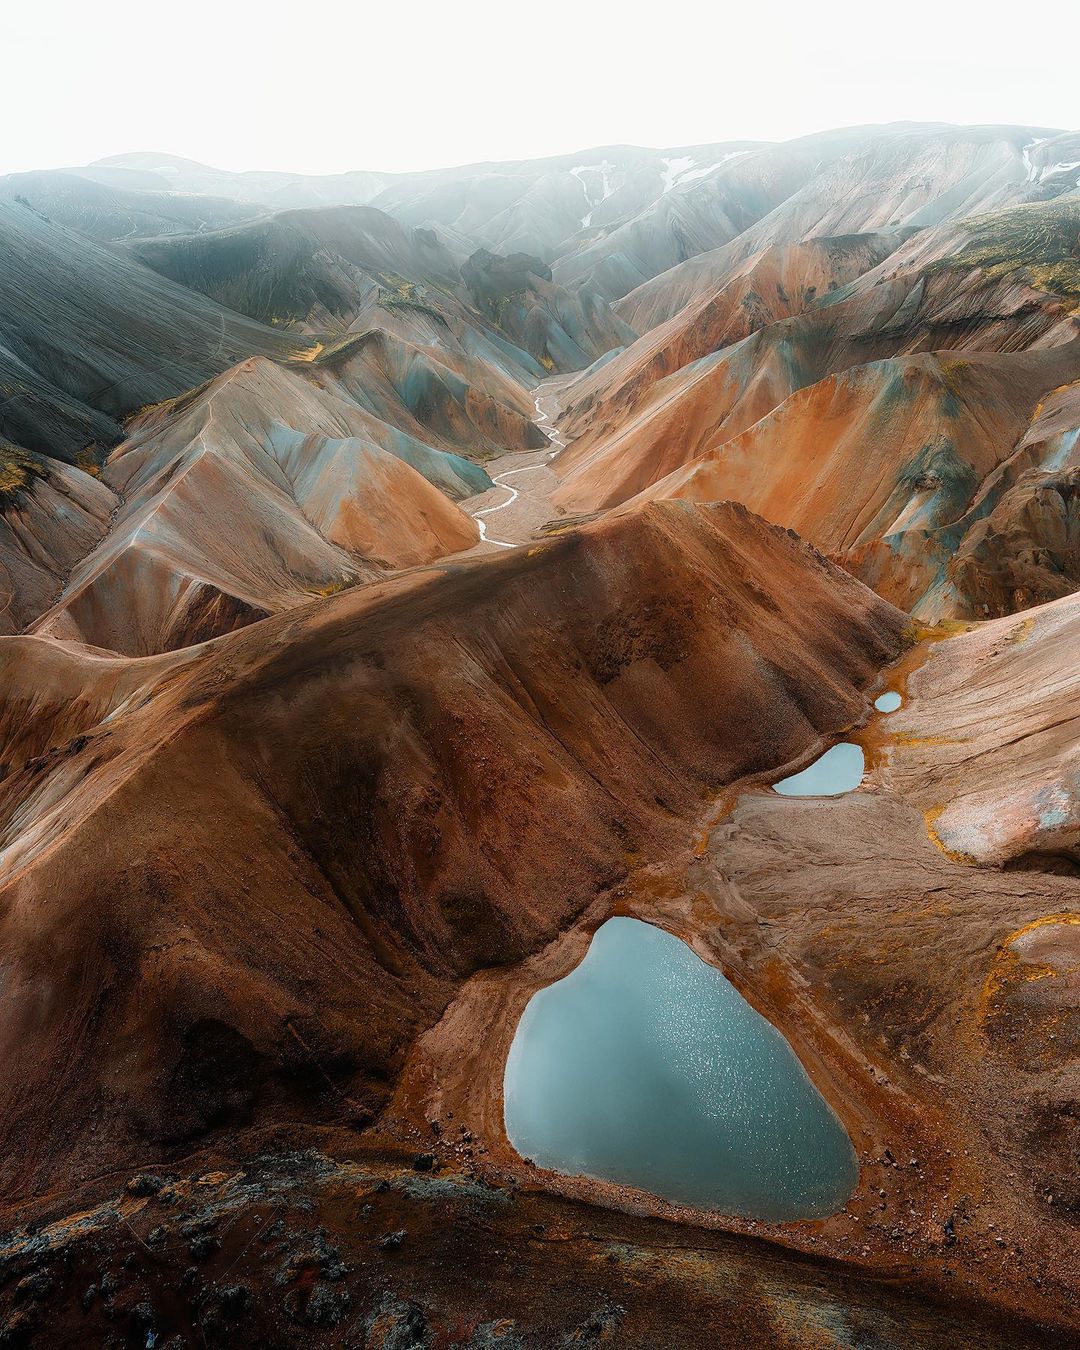 The incredibly colourful hills of Landmannalaugar in Iceland’s highlands